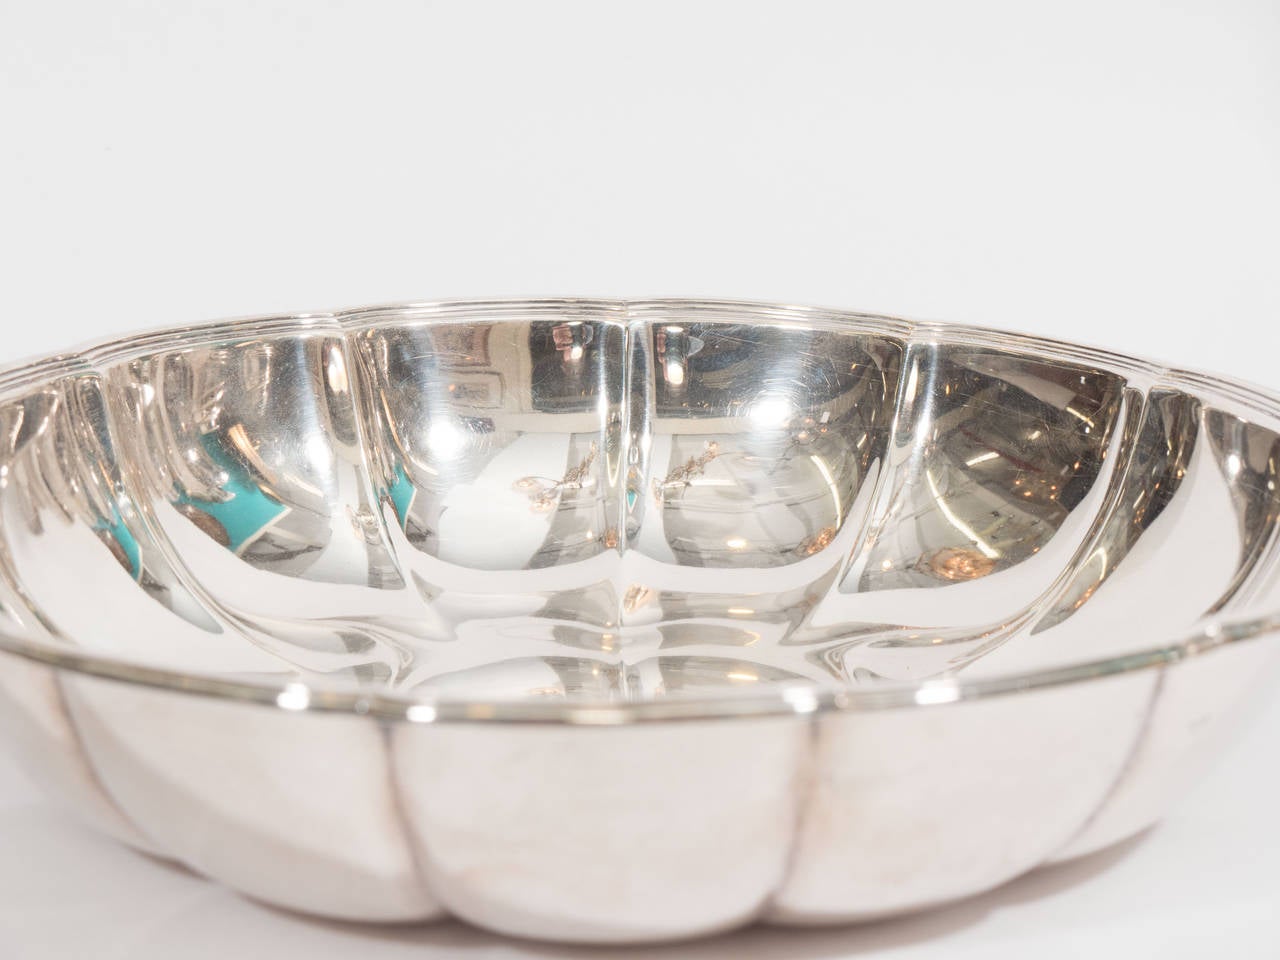 A vintage Tiffany & Co. sterling silver scalloped low bowl or dish. Marked Tiffany & Co. Makers Sterling Silver 9 2 5-10000.

Good vintage condition with age appropriate wear. Some scratches.